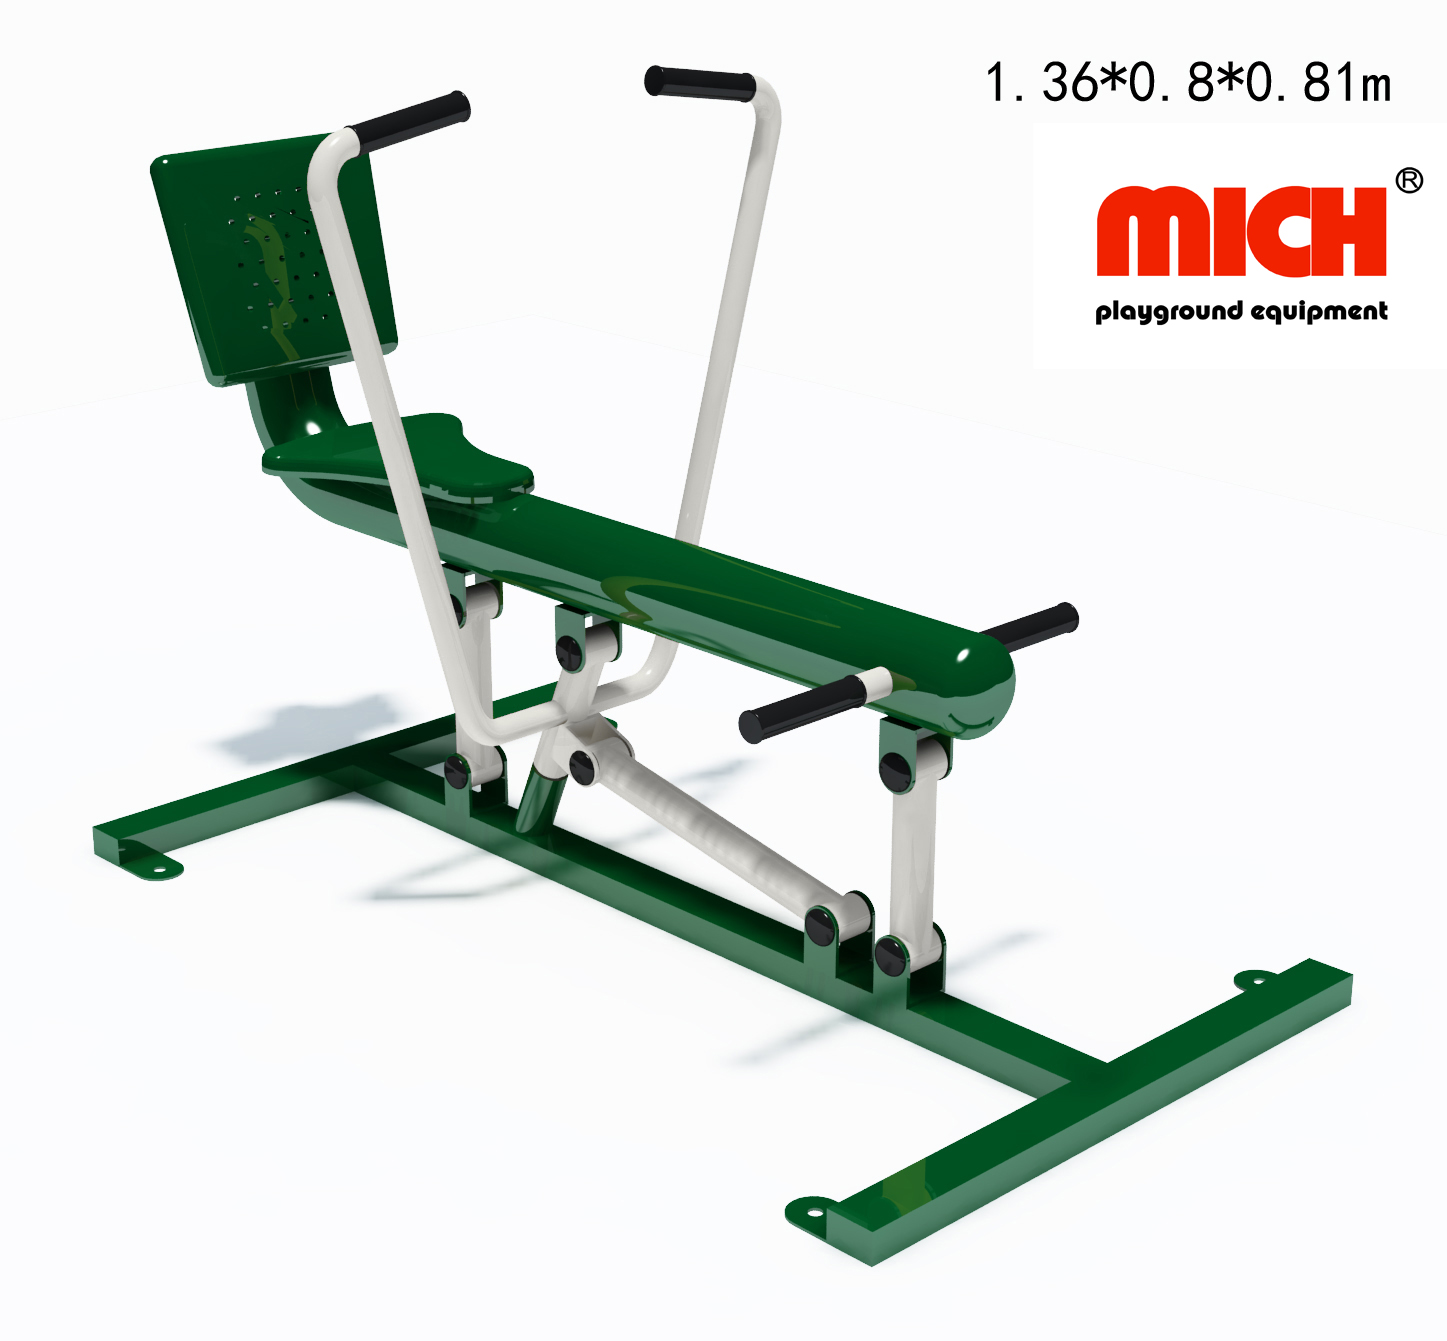 How to choose high-quality outdoor fitness equipment?